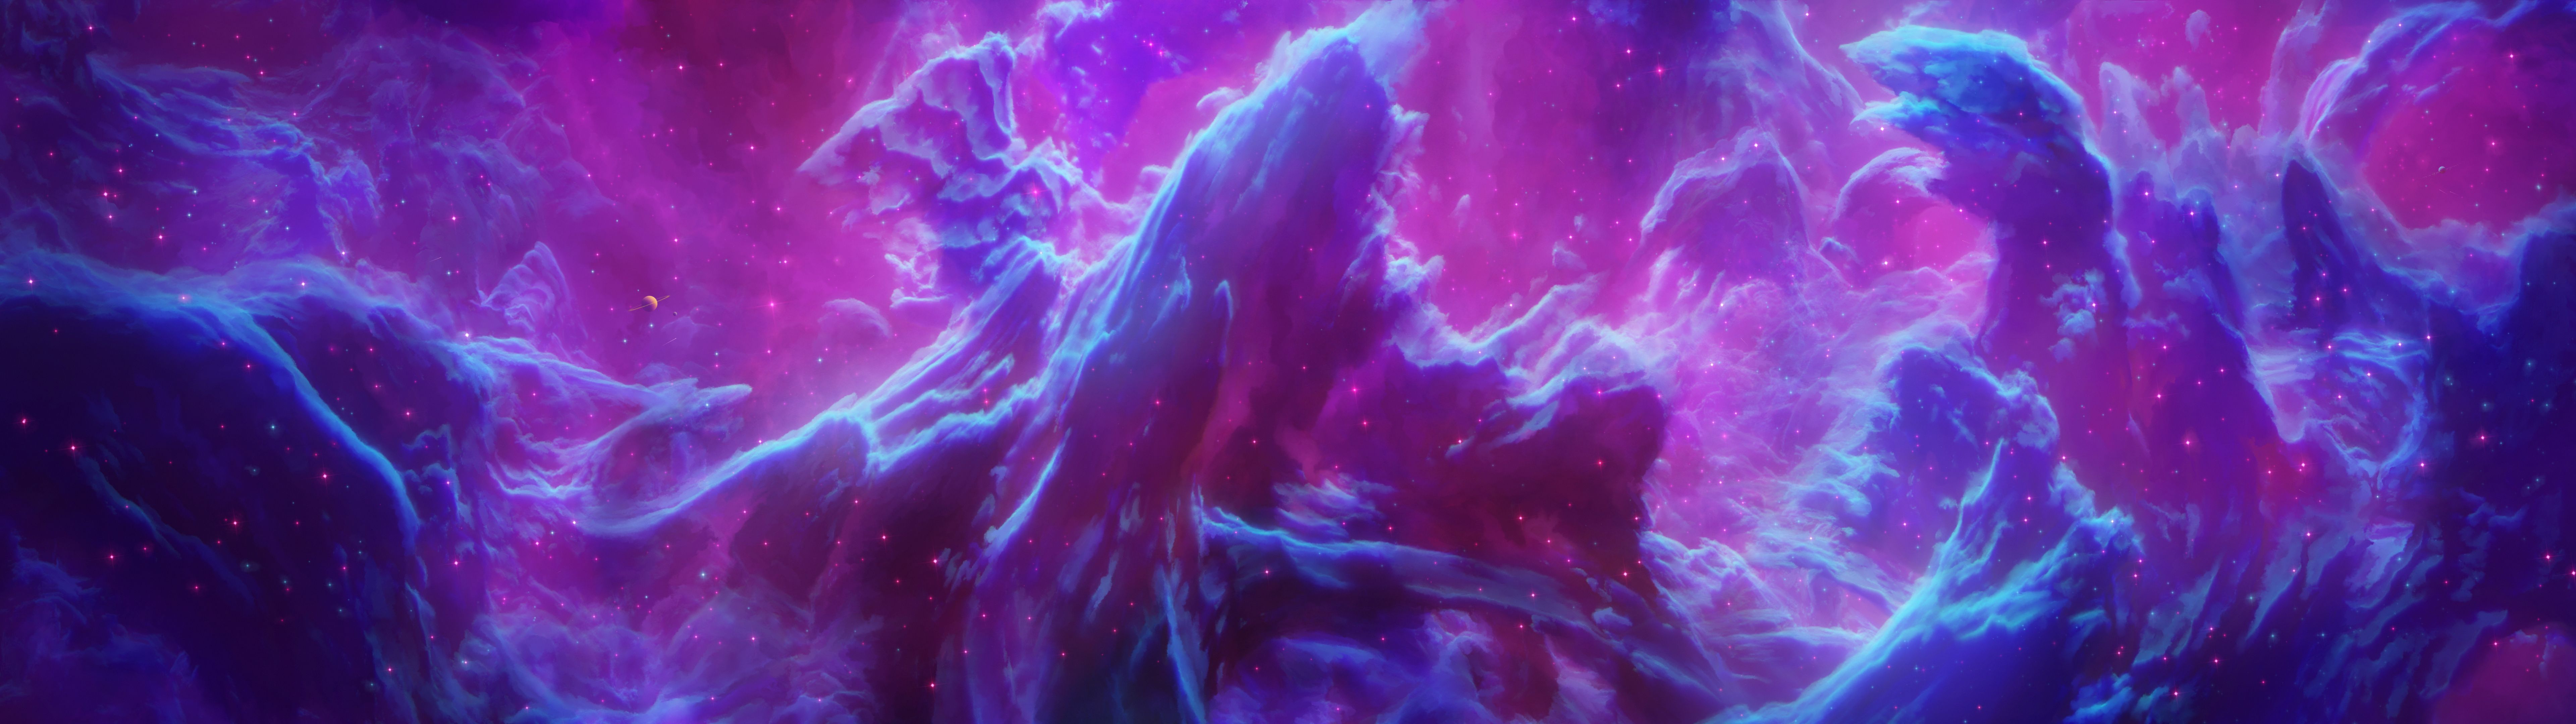 Purple Space Stars 8k, HD Digital Universe, 4k Wallpaper, Image, Background, Photo and Picture